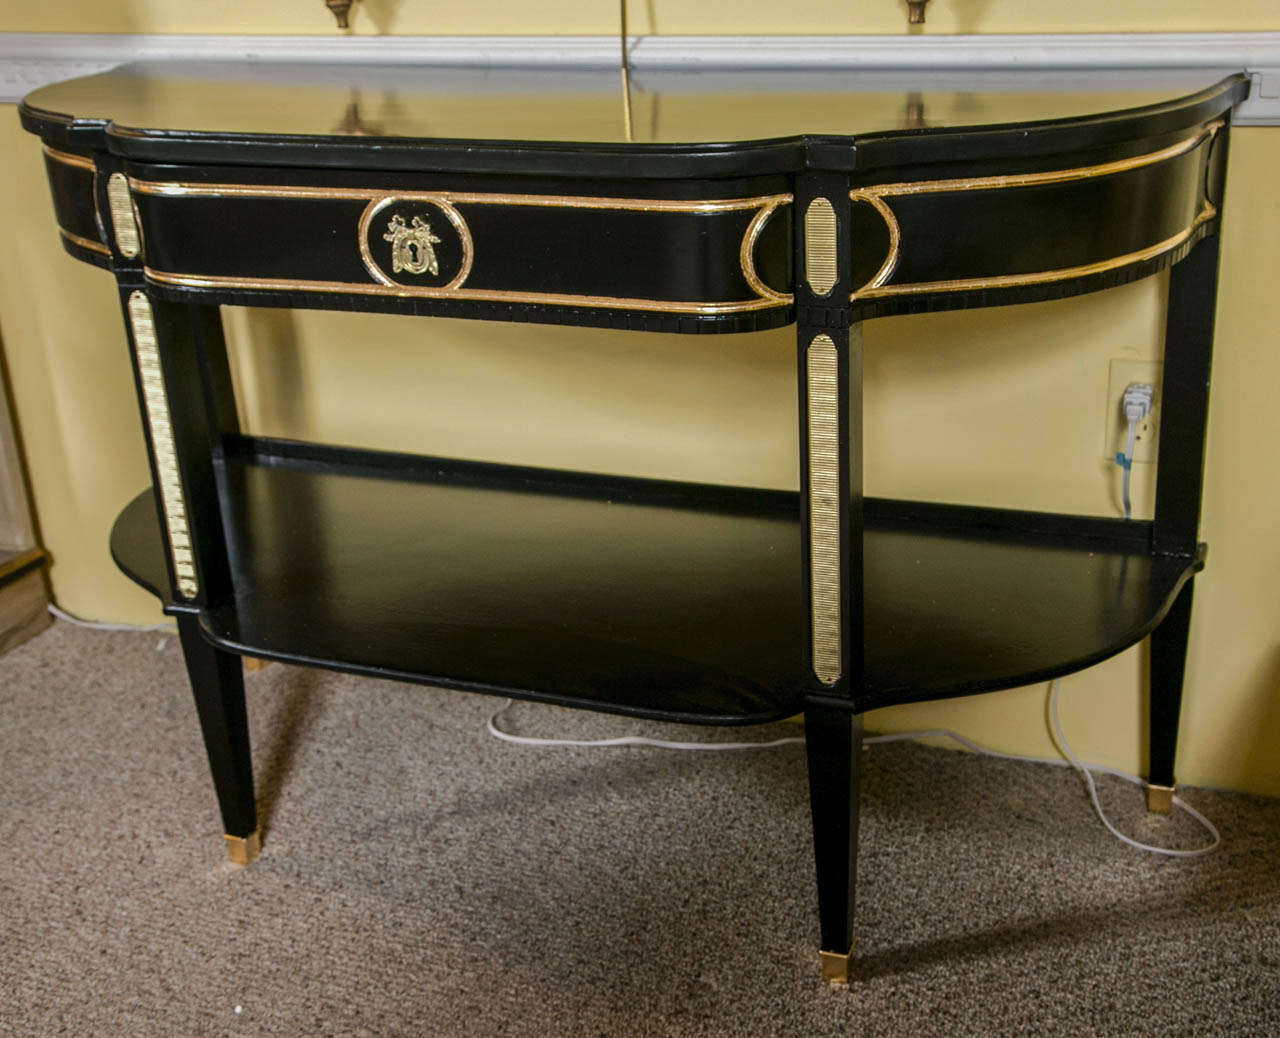 An early example of a very fine pair of Maison Jansen France Console Tables. Each stamped Made in France. The Louis XVI style tapering legs with bronze sabots having a lower connecting shelf and ribbed bronze fronts. Each center drawer flanked by